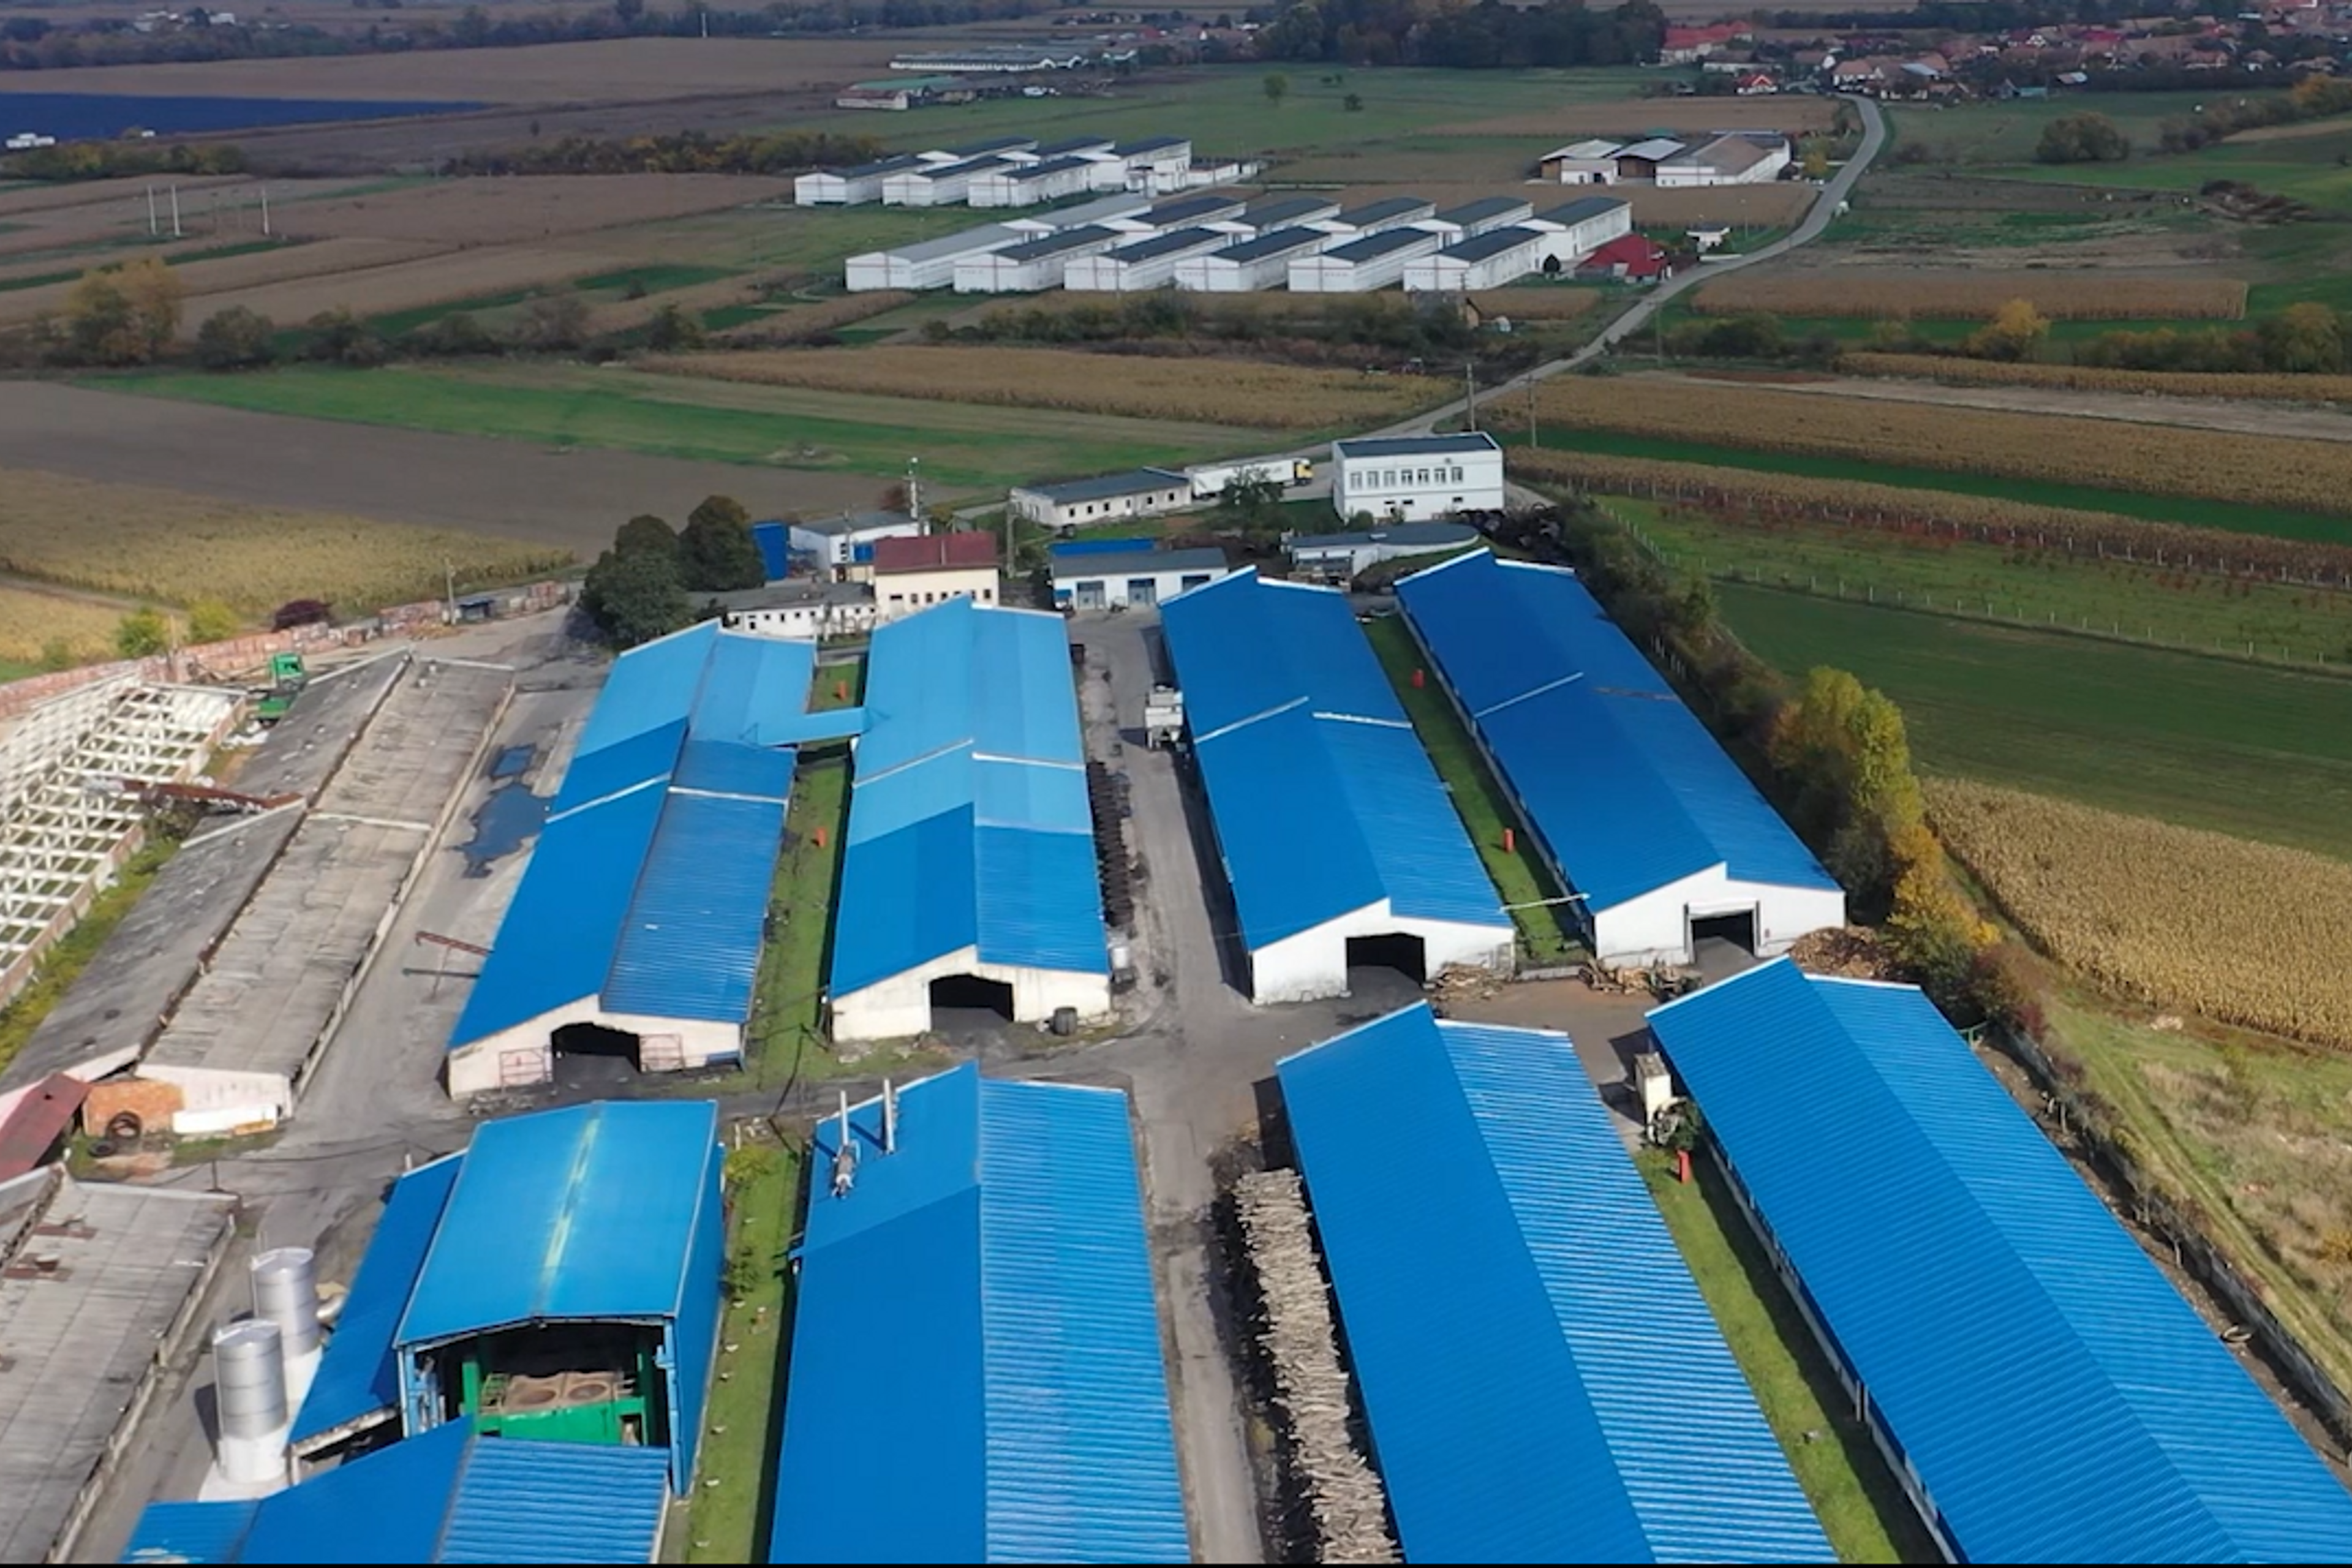 Production facilities for greens